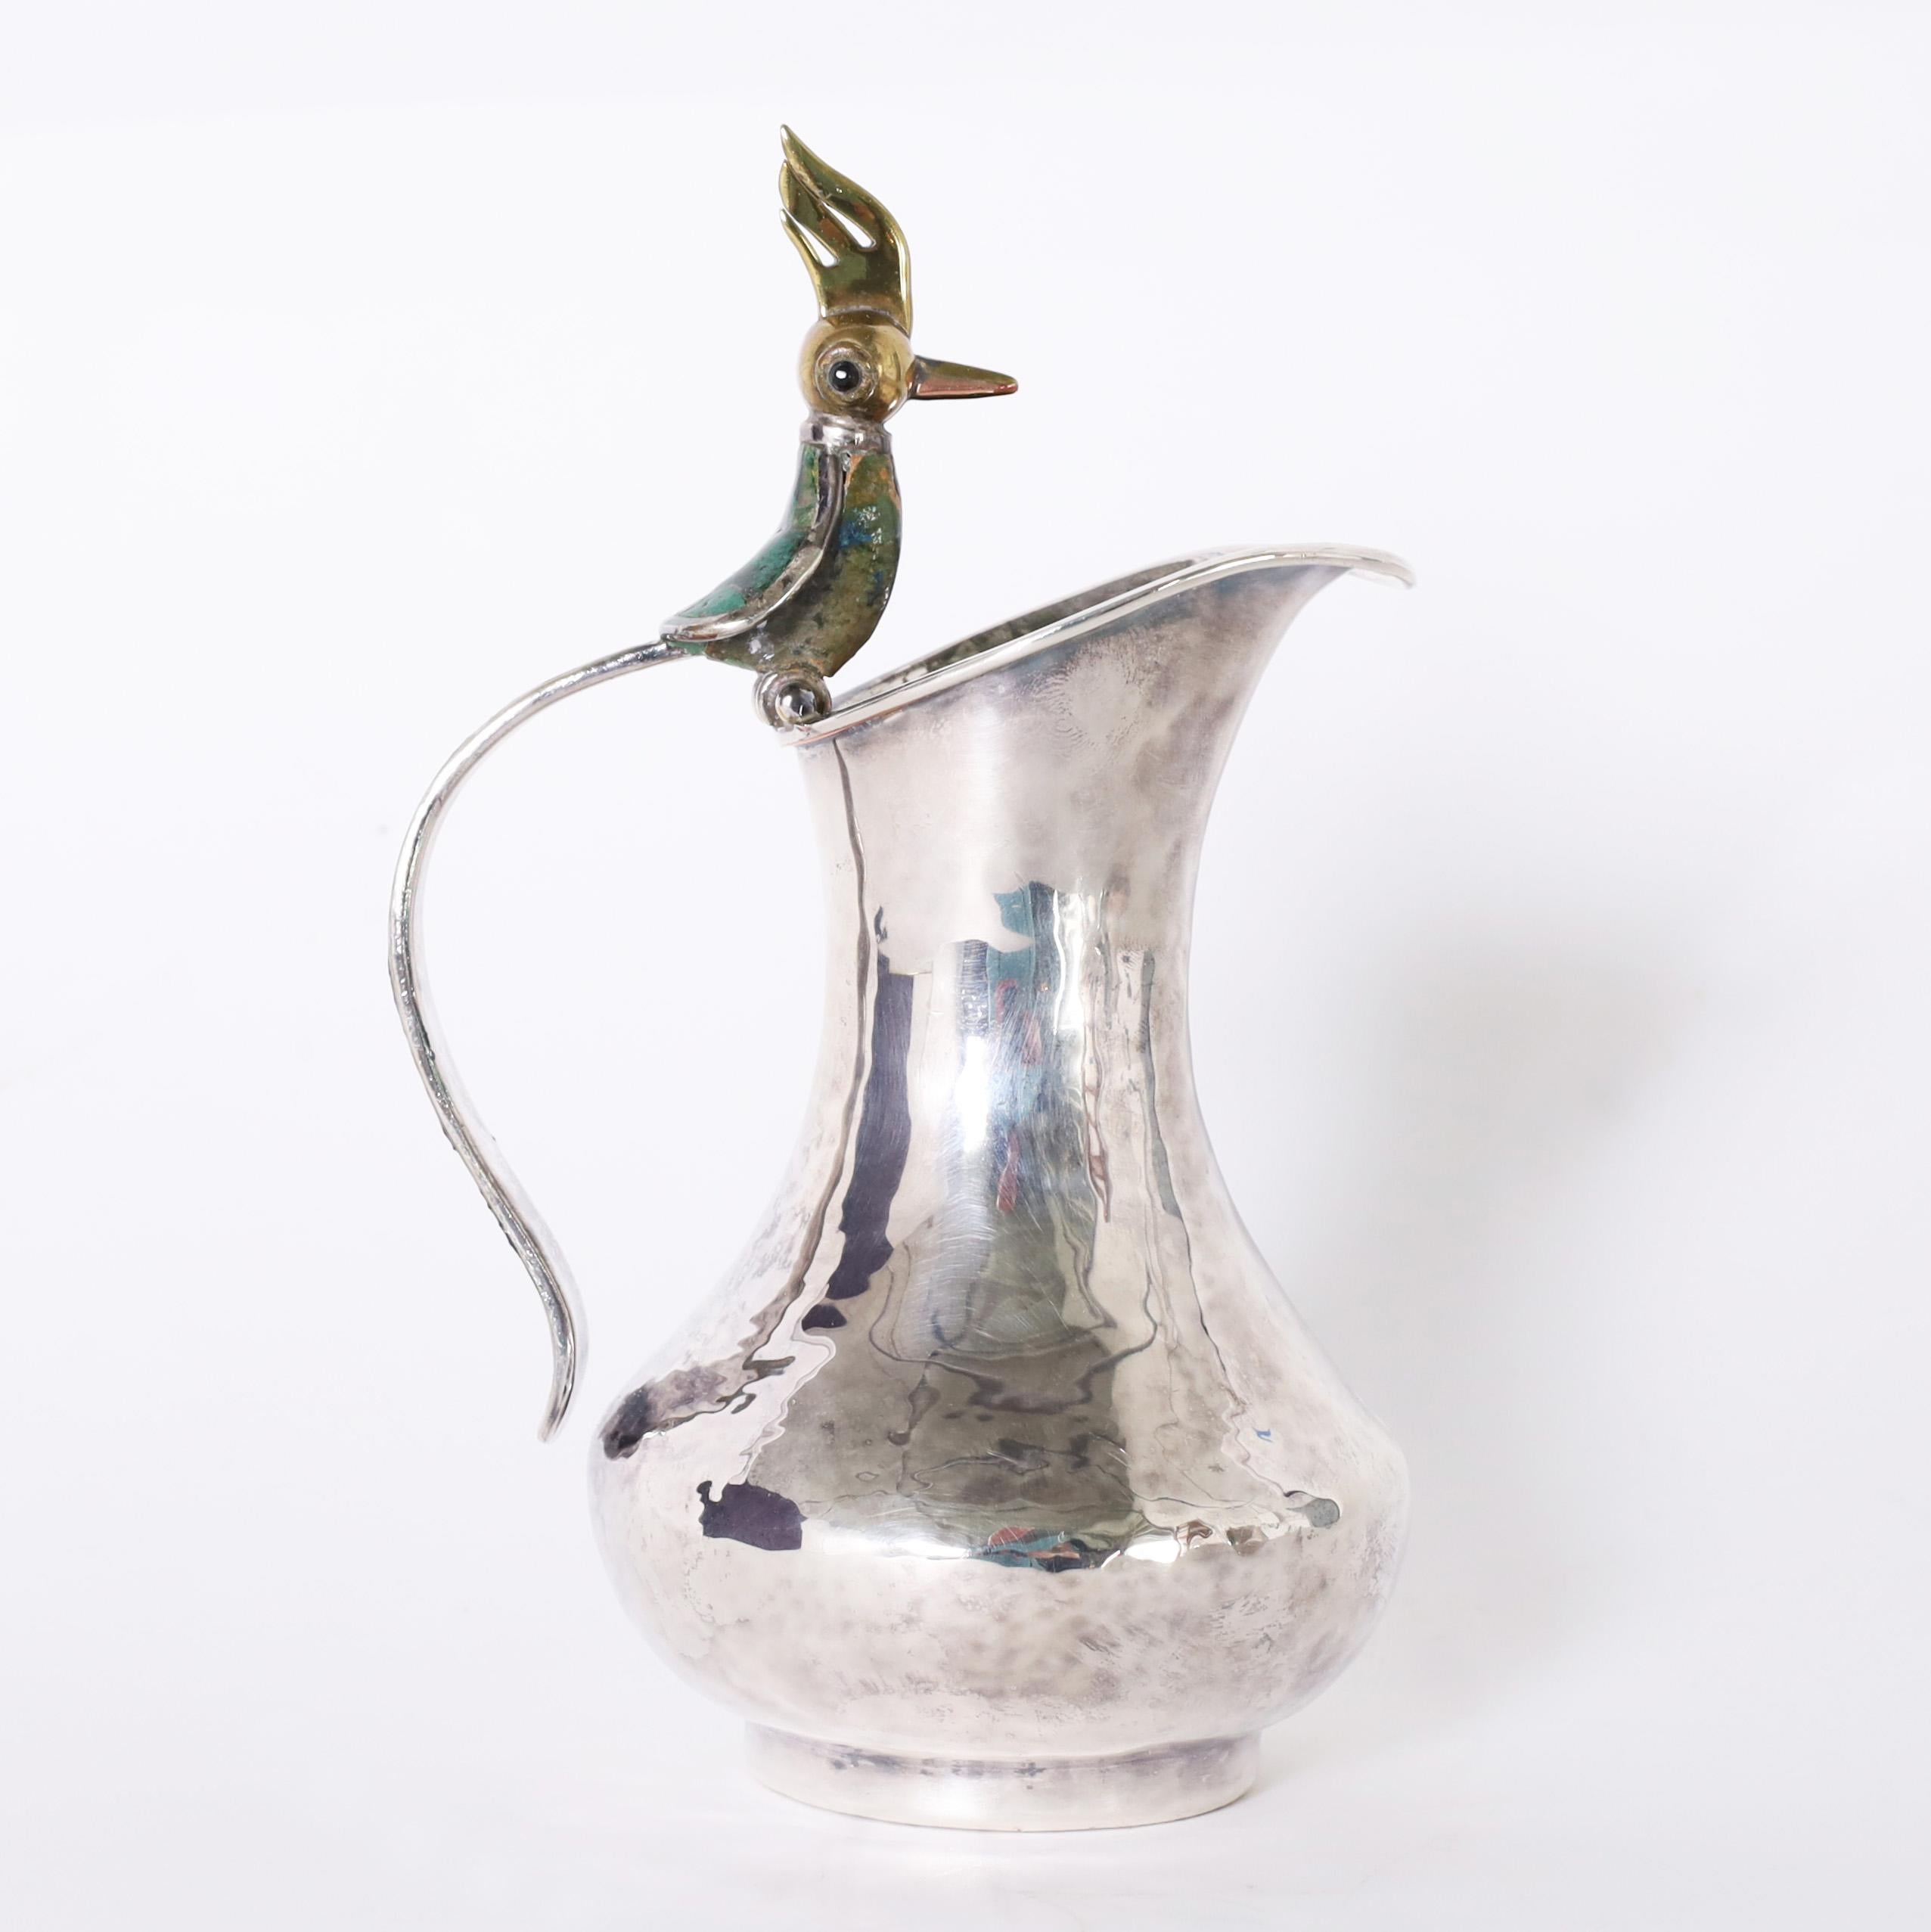 Two piece Vintage cream pitcher and sugar bowl having a pitcher hand crafted in silver over copper with a stone clad bird as a handle and a hand crafted sugar bowl with a stone handled lid, spoon and stone clad bird handle. Signed Los Castillo on